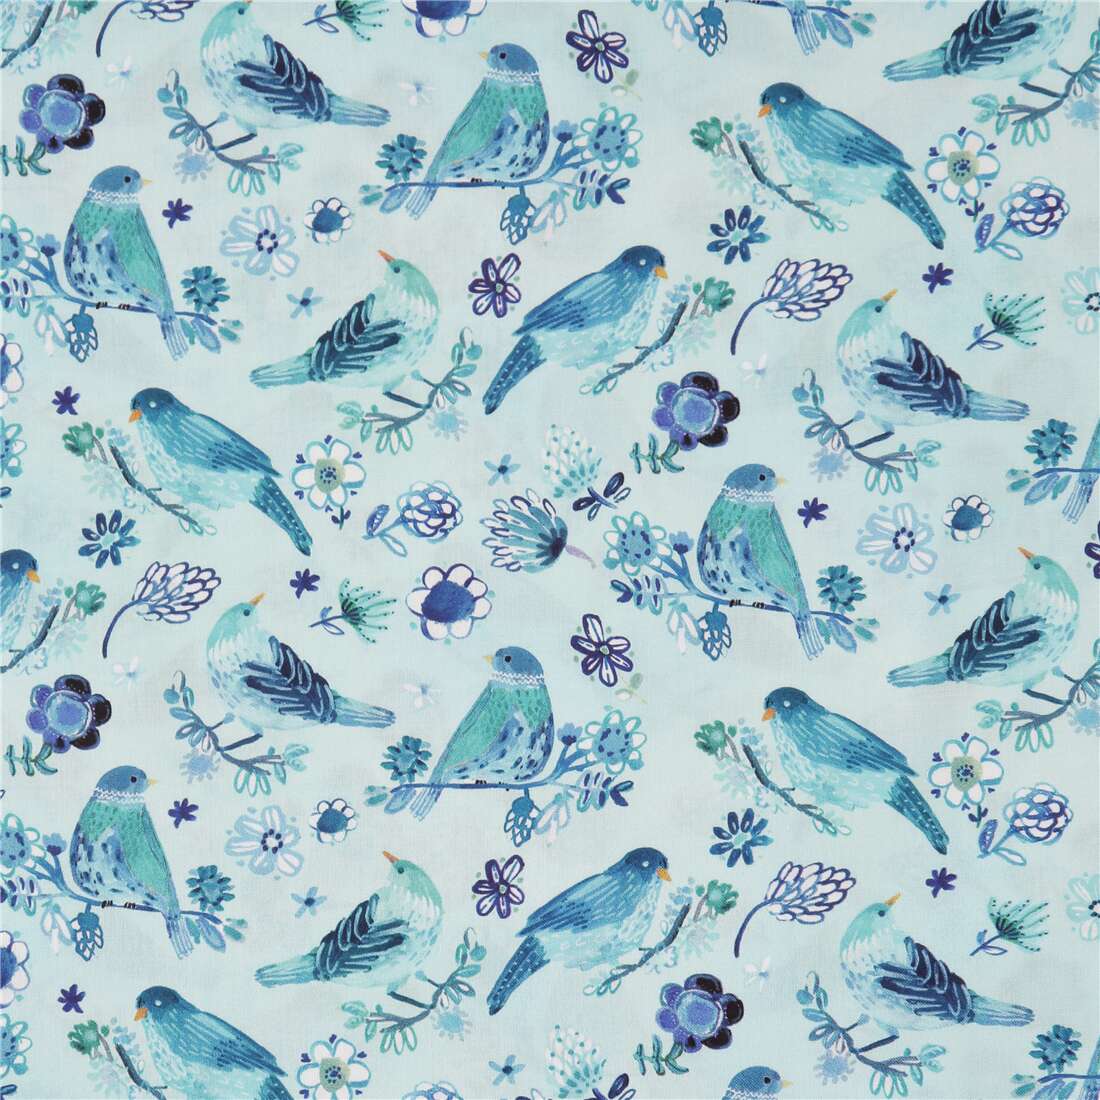 Tree of Life Birds on Branches Flowers Fabric by Dear Stella - modeS4u